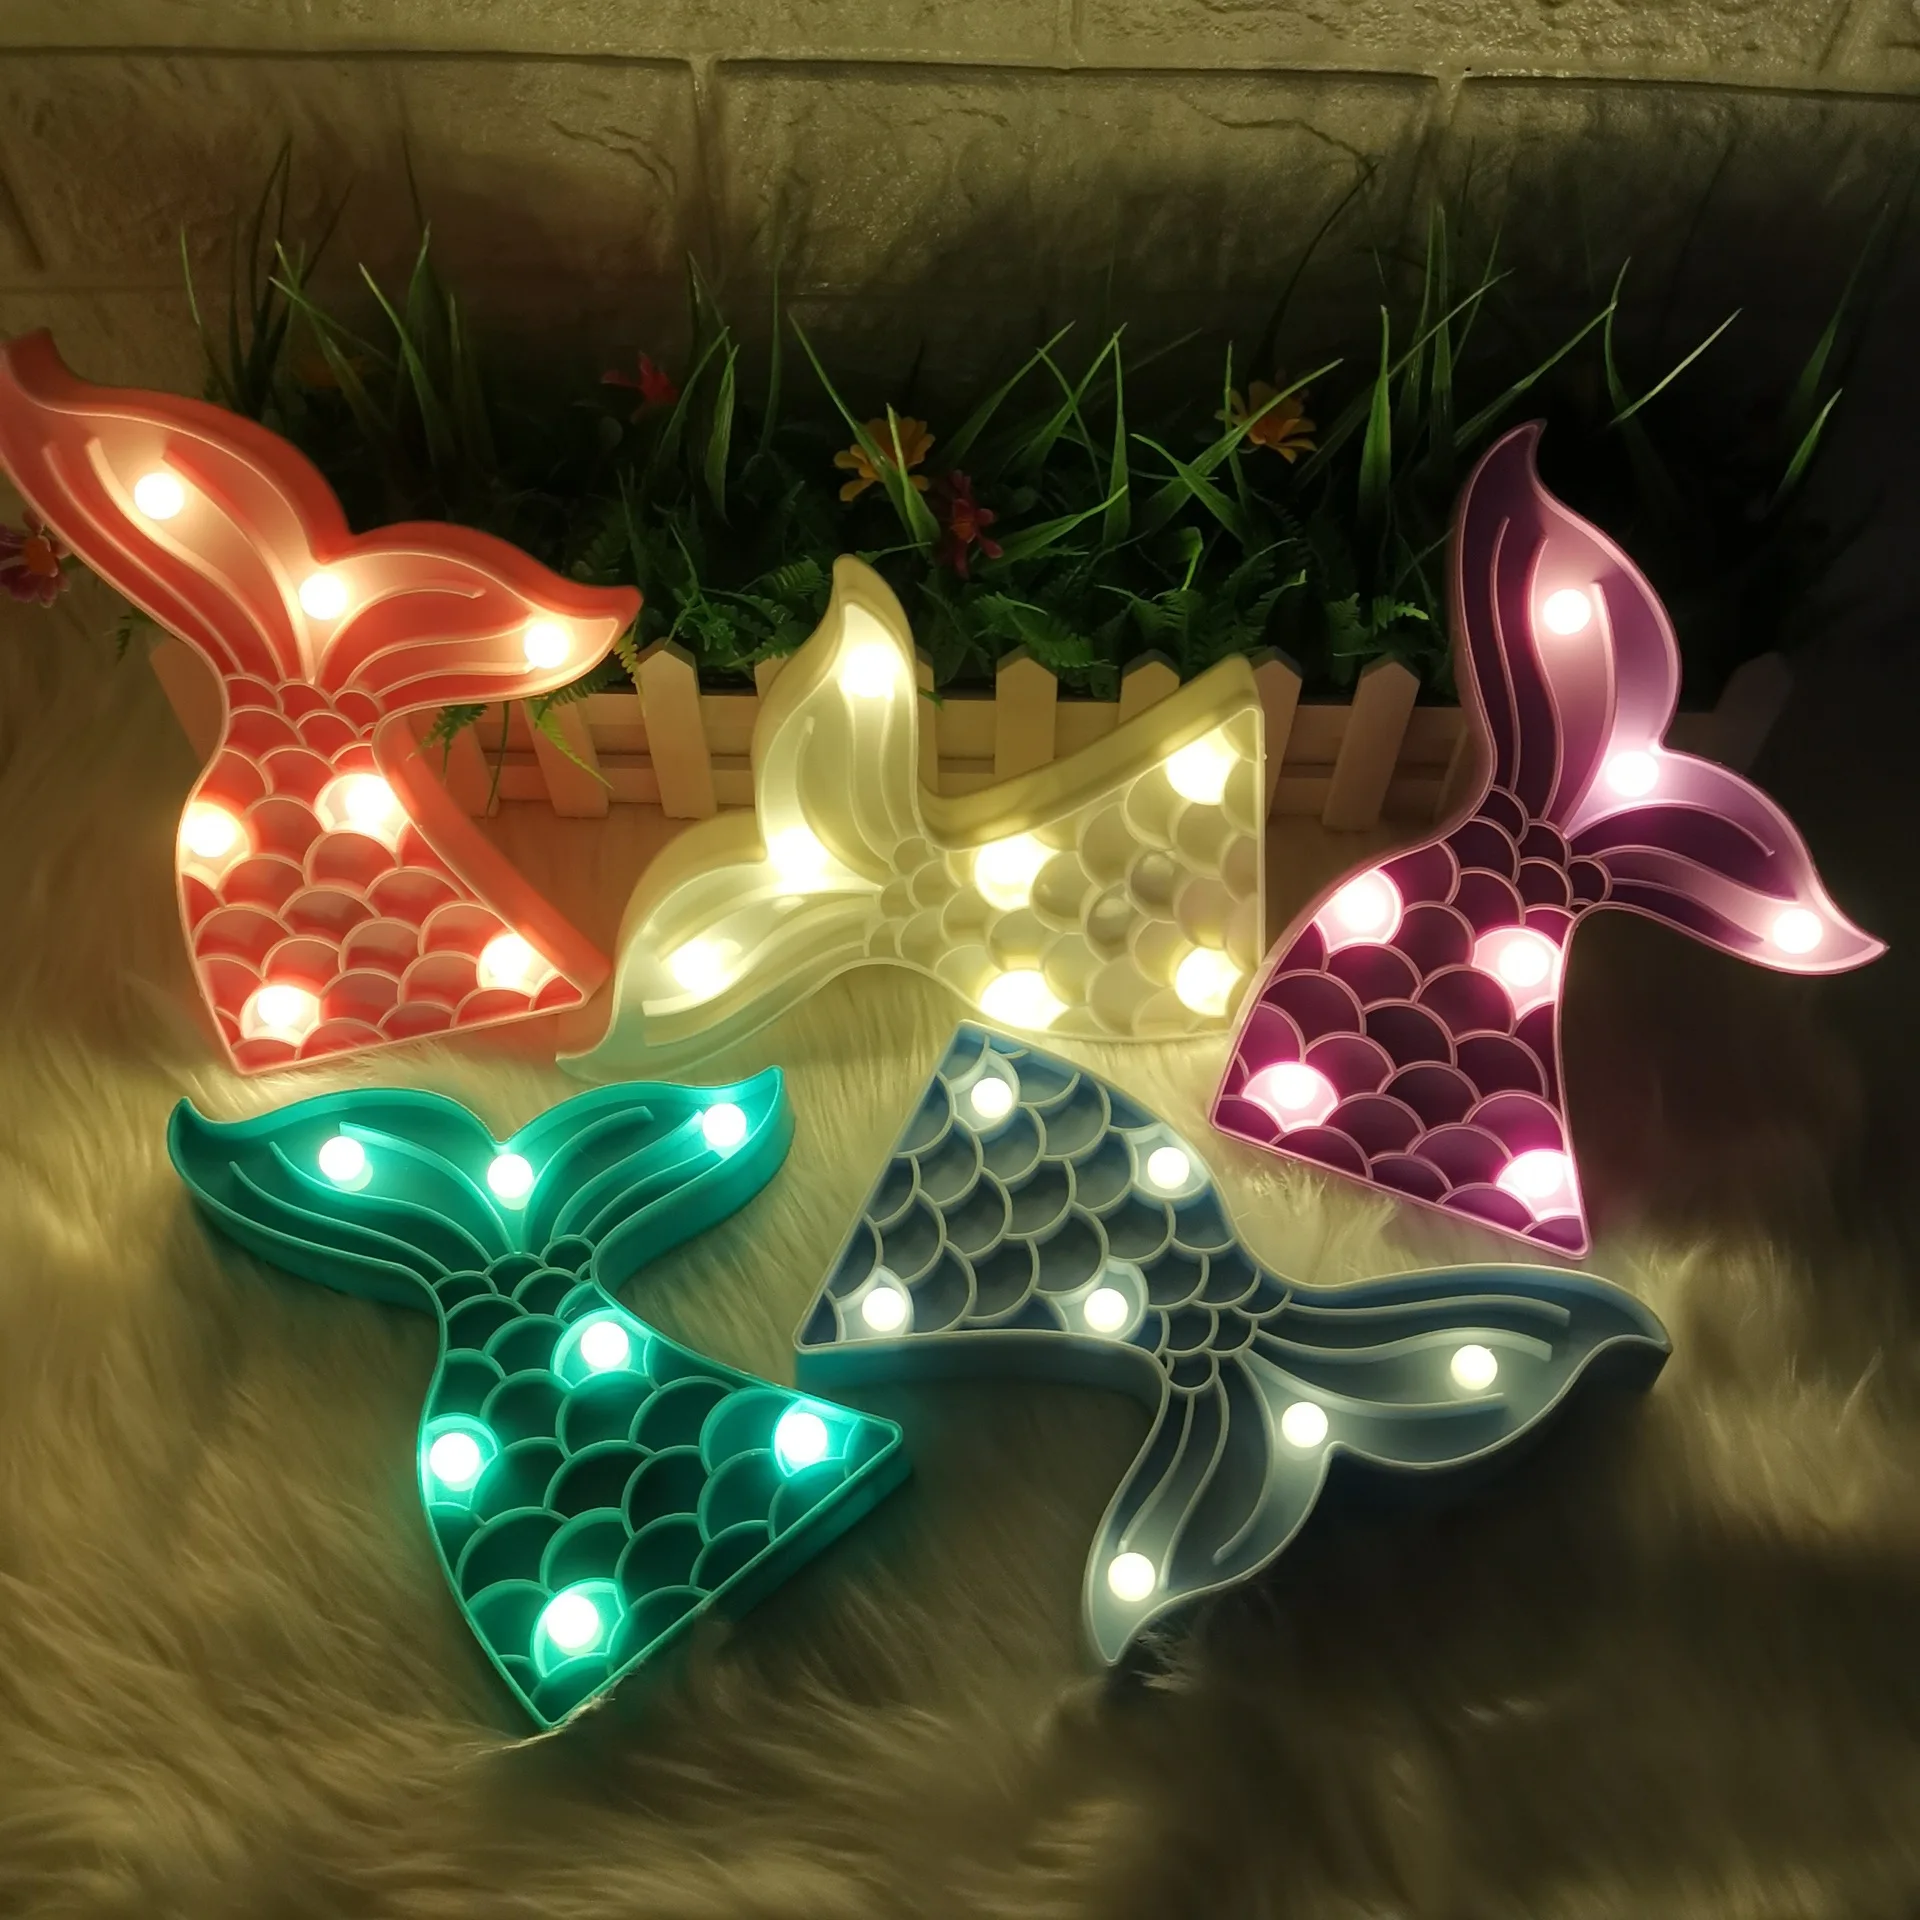 LED Night Light Mermaid Tail Mode Decoration with 7 LED Lighting Lamp Beautiful Christmas Decora Independent Suspension Design